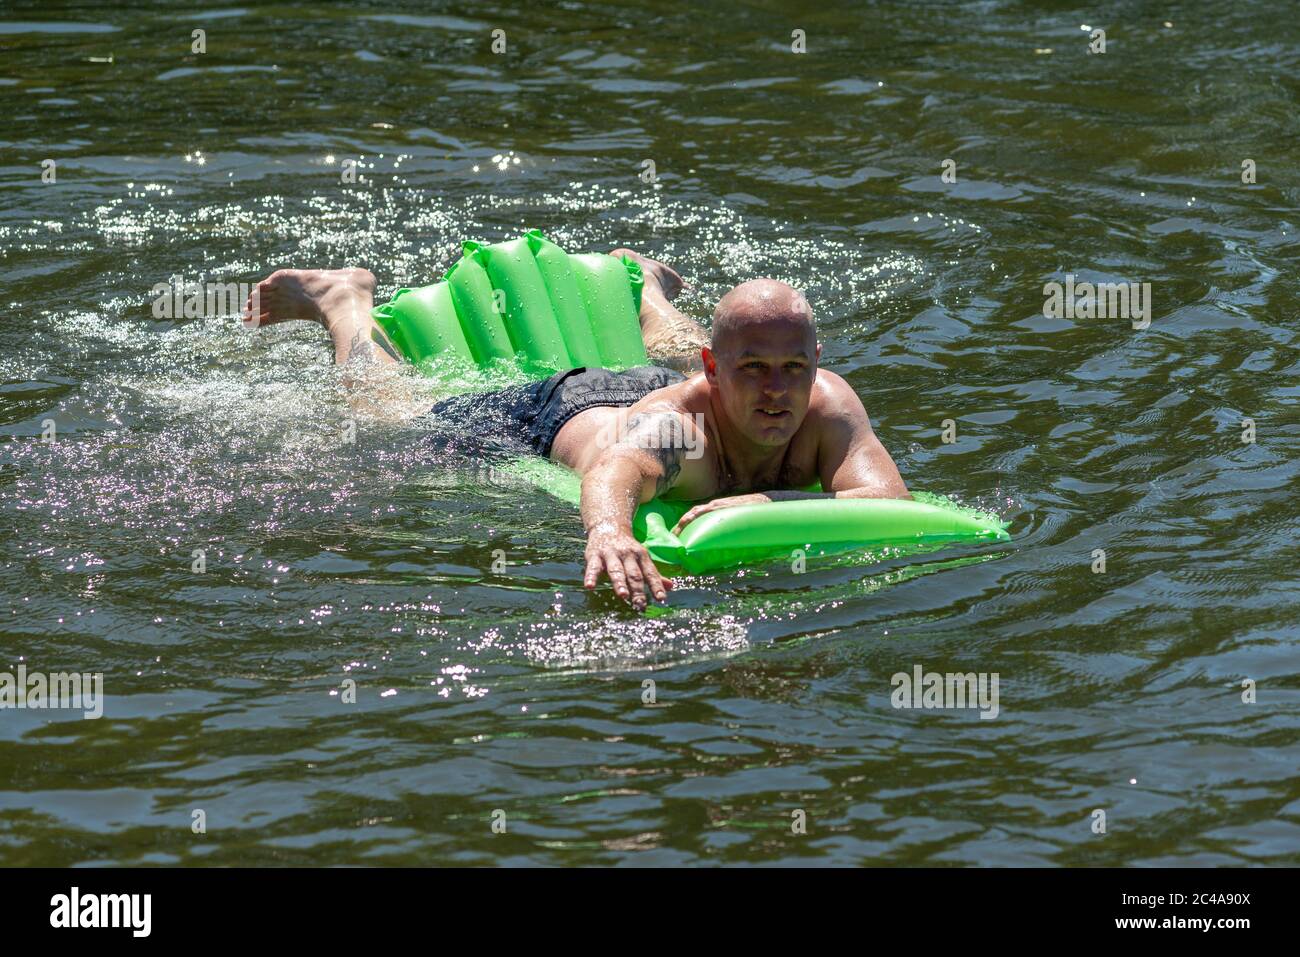 Man on a lilo swimming in the River Avon cooling off in the cold water. Mid-summer heatwave making it the hottest day with the highest UV levels so far this year and the temperature at around 33 degrees in the afternoon. Fordingbridge, New Forest, Hampshire, England, UK, 25th June 2020. Stock Photo